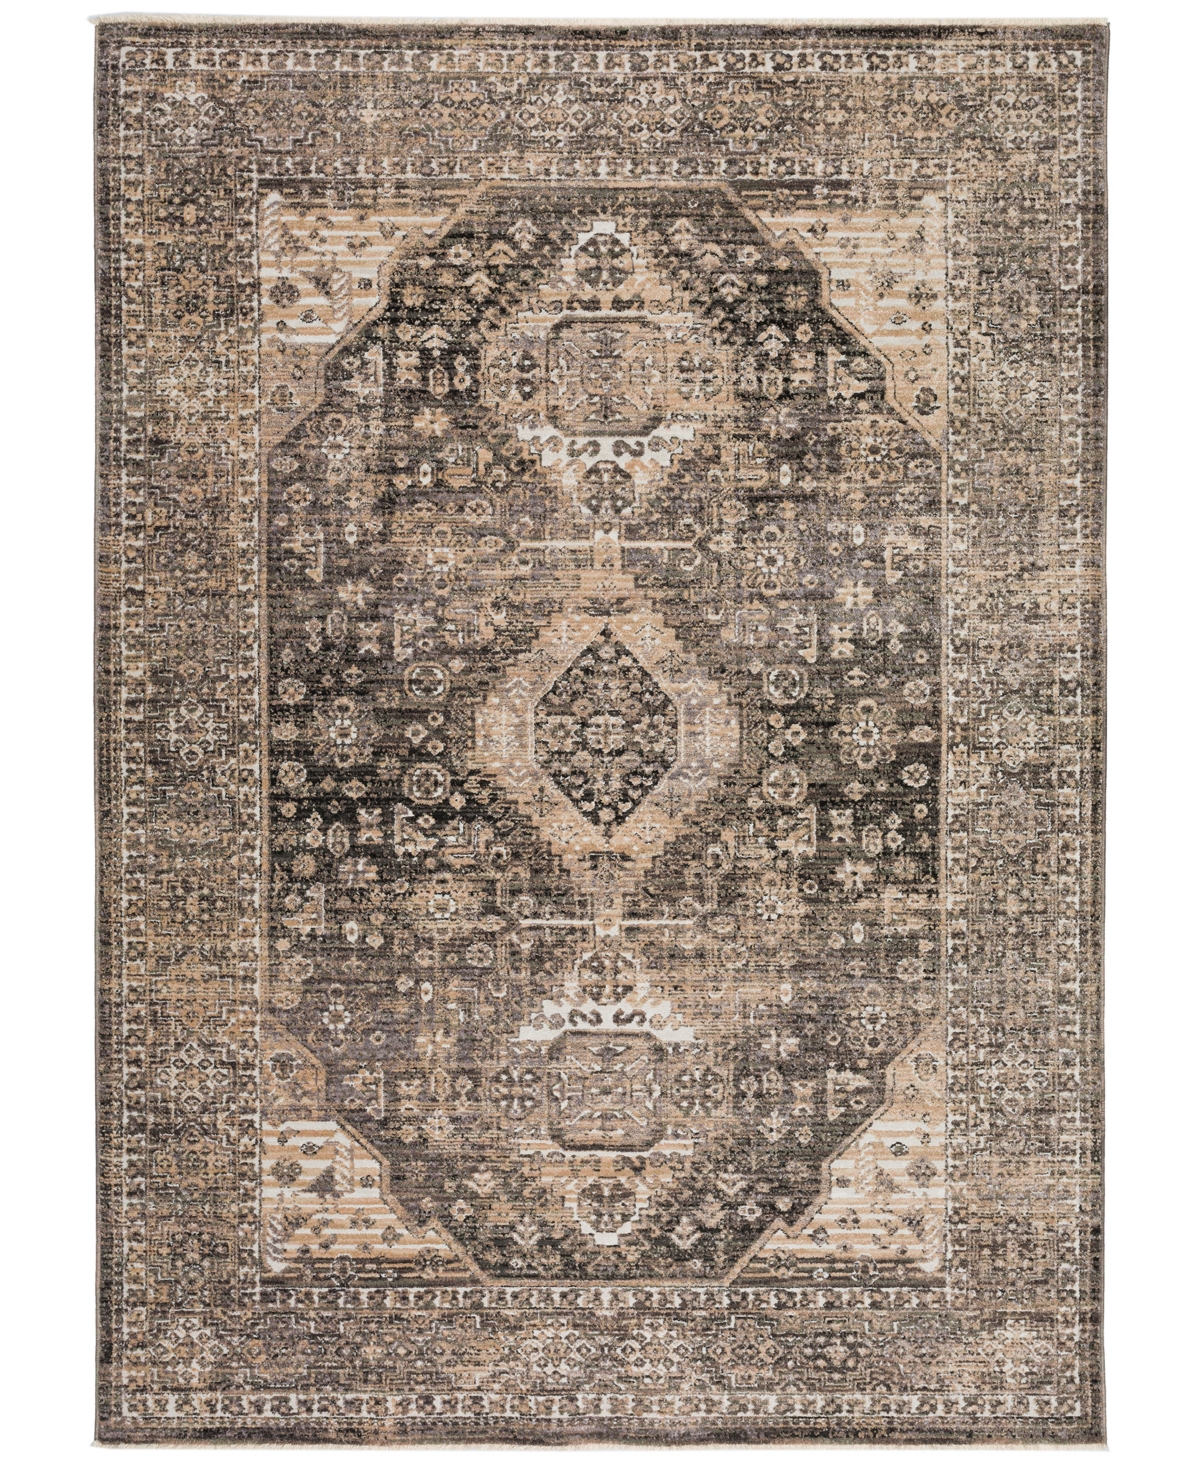 D Style Sergey Sgy2 3' X 5' Area Rug In Charcoal